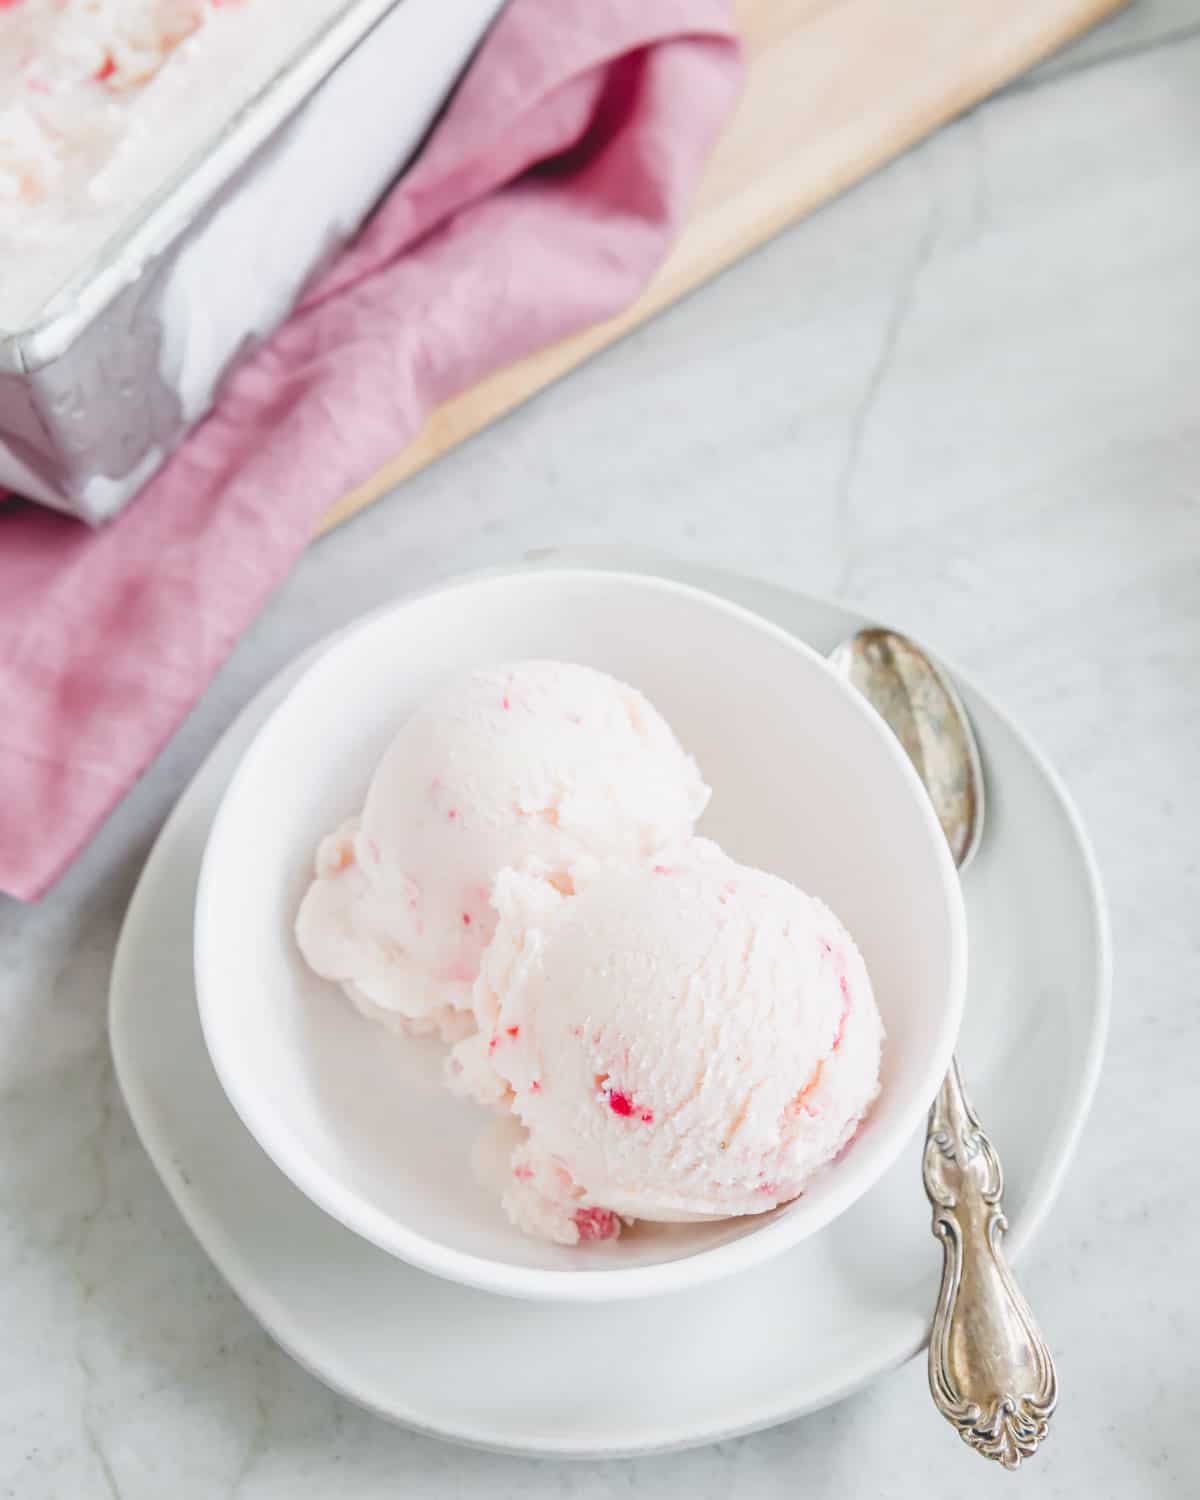 Two scoops of strawberry kefir ice cream.